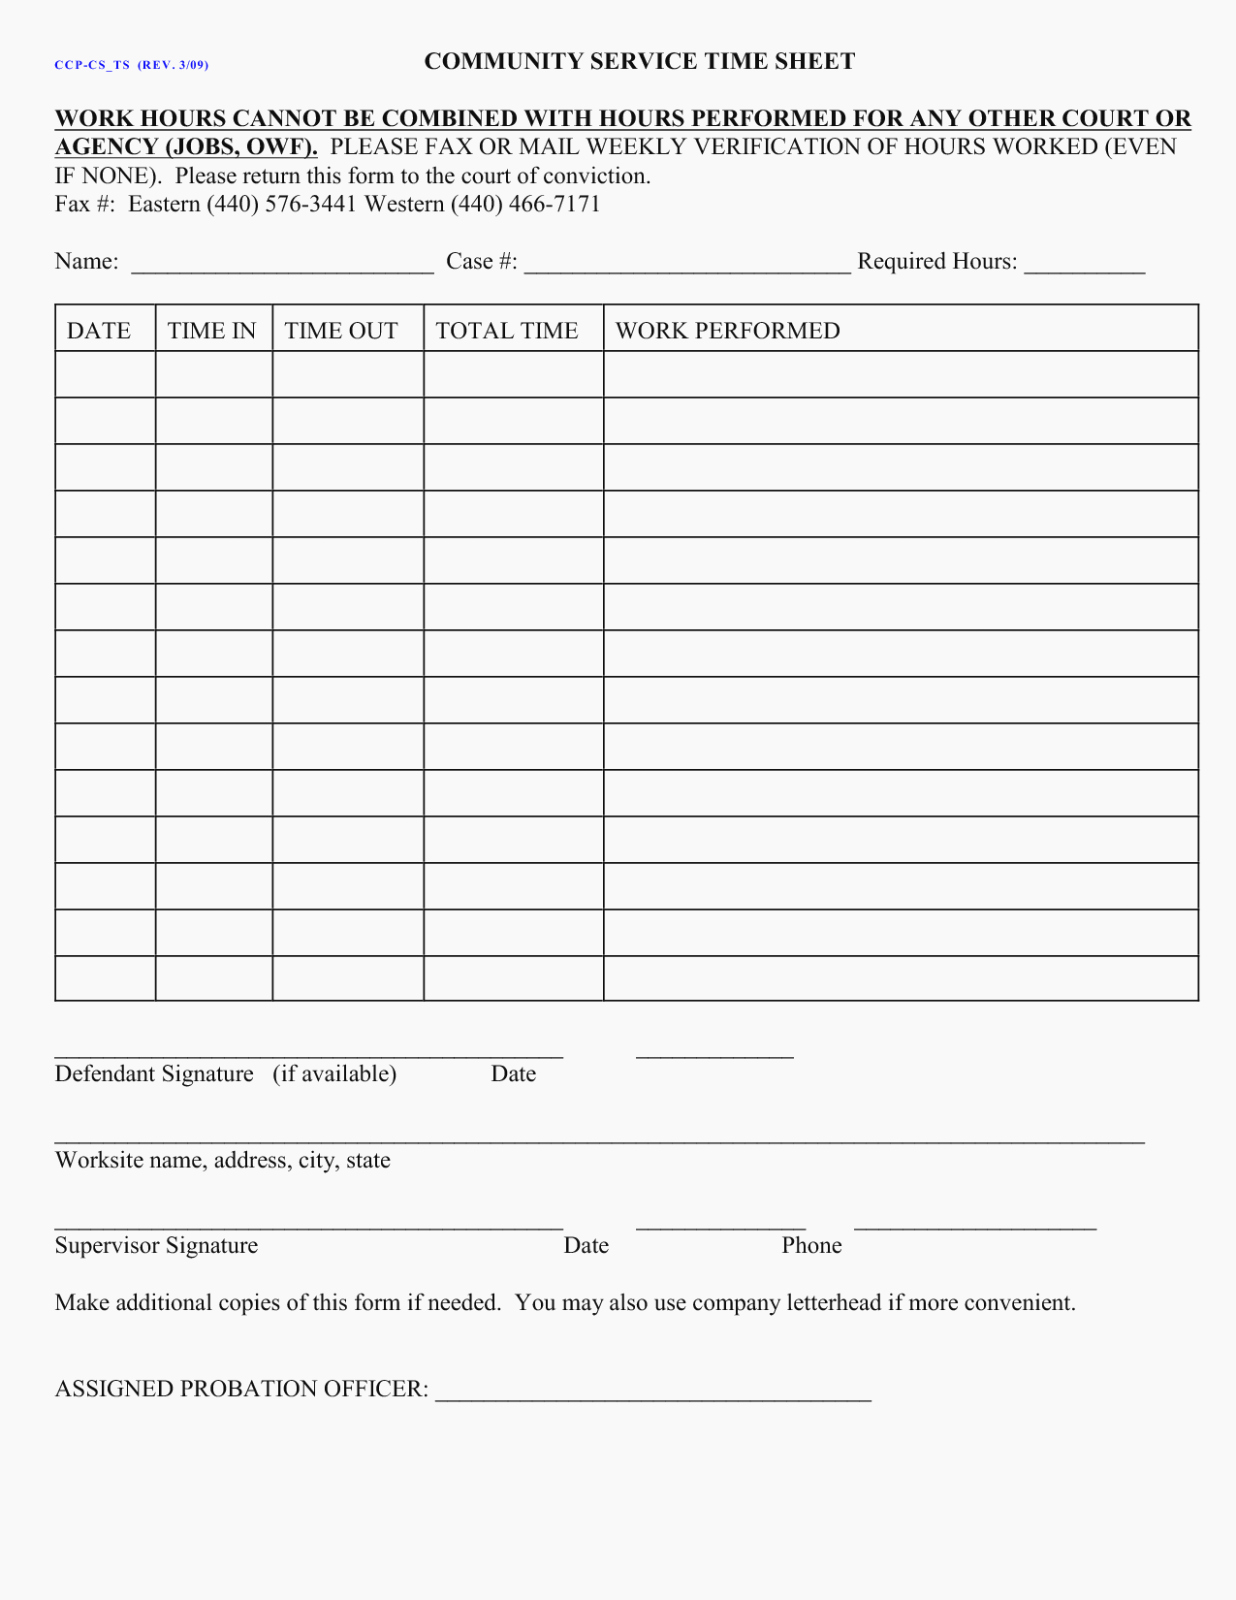 Community Service Hours form Template New 15 Fantastic Vacation